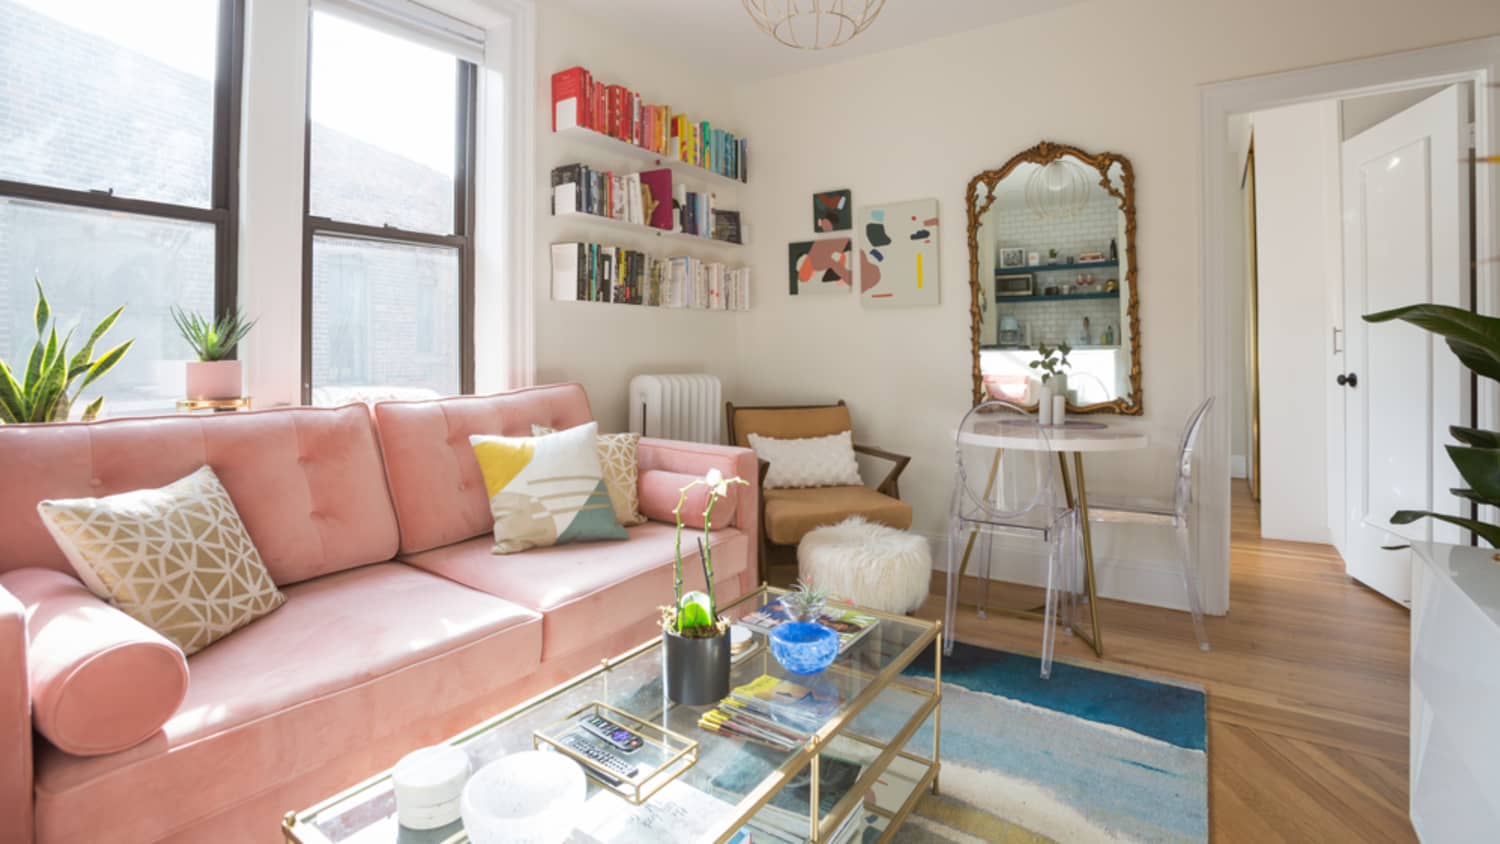 How To Make Your Living Room Look Bigger Instantly Apartment Therapy